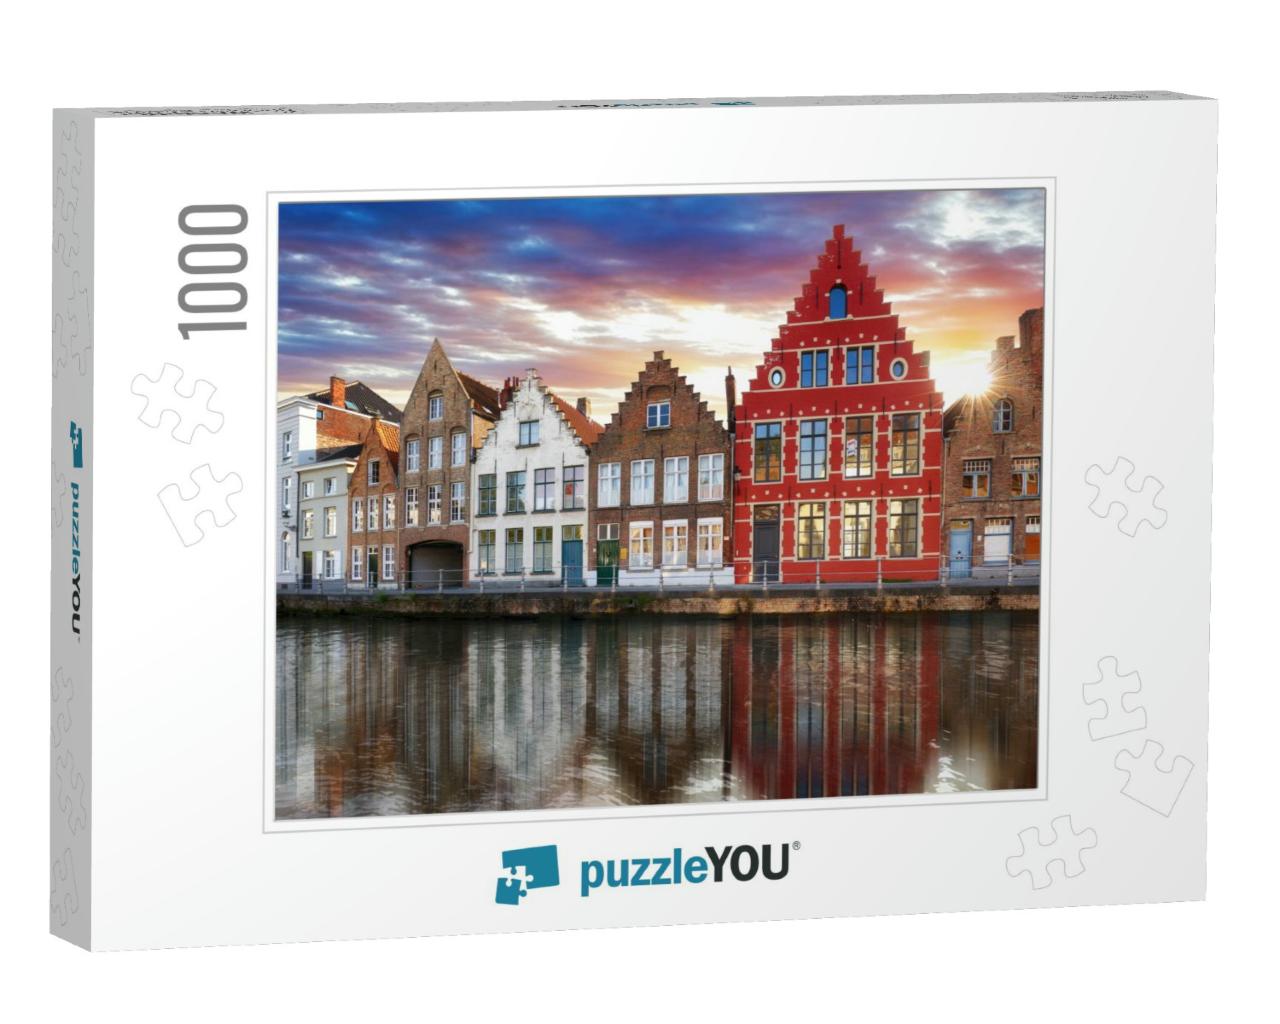 Bruges - Canals of Brugge, Belgium, Evening View... Jigsaw Puzzle with 1000 pieces